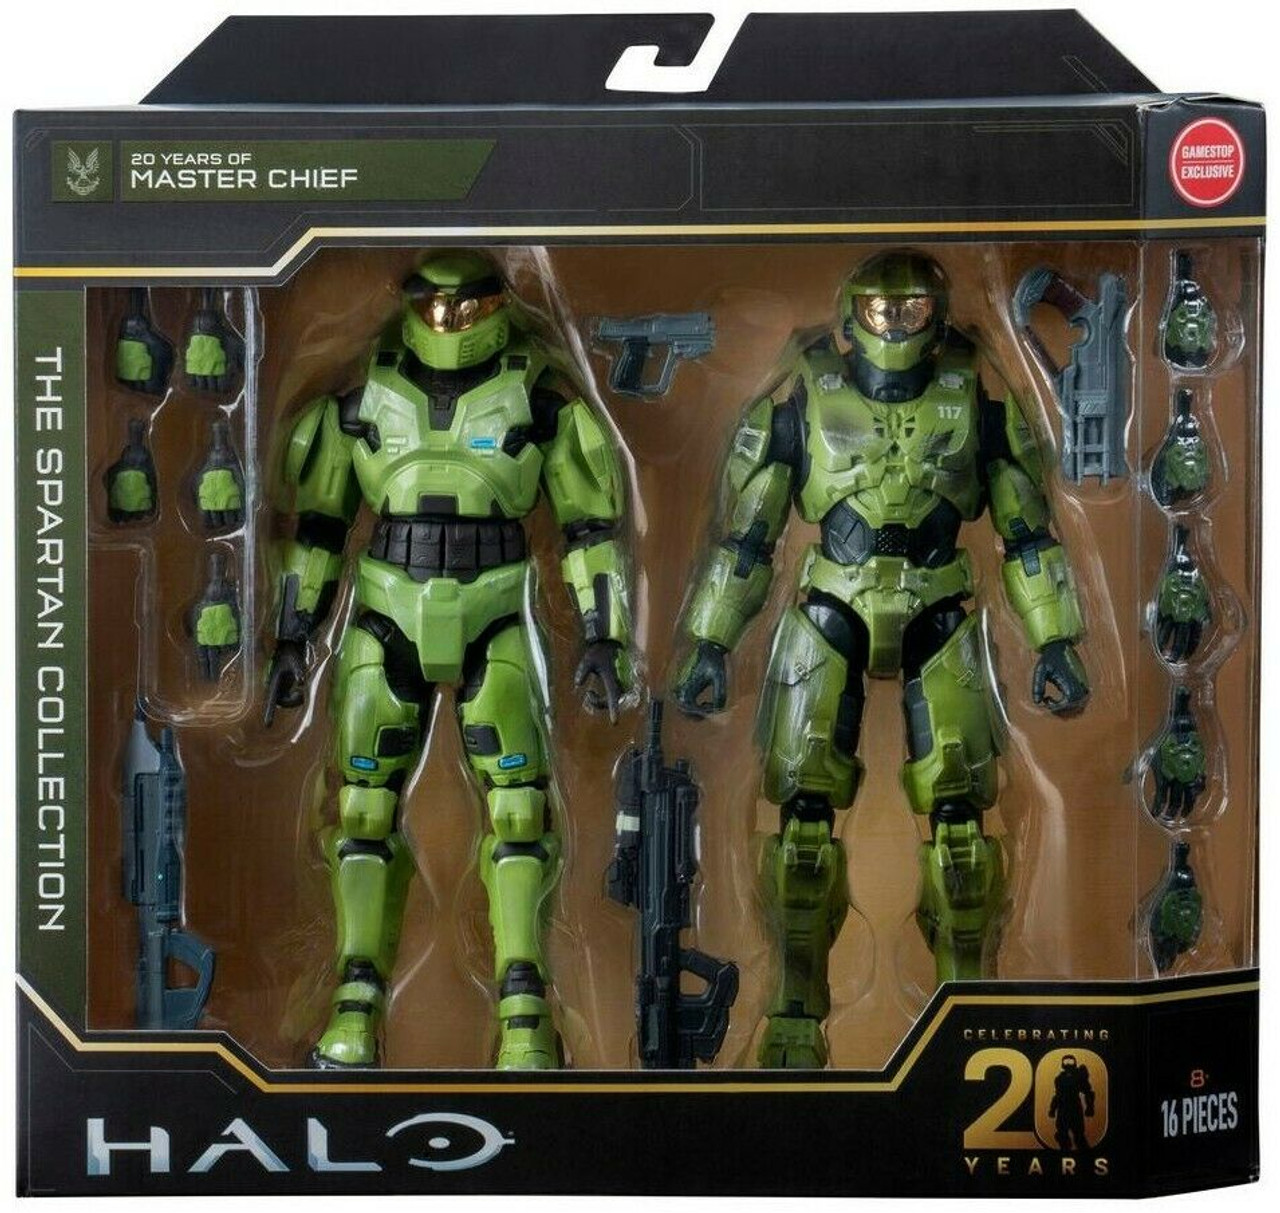 HALO SPARTAN COLLECTION MASTER CHIEF HALO 4 SERIES 6 Action Figure